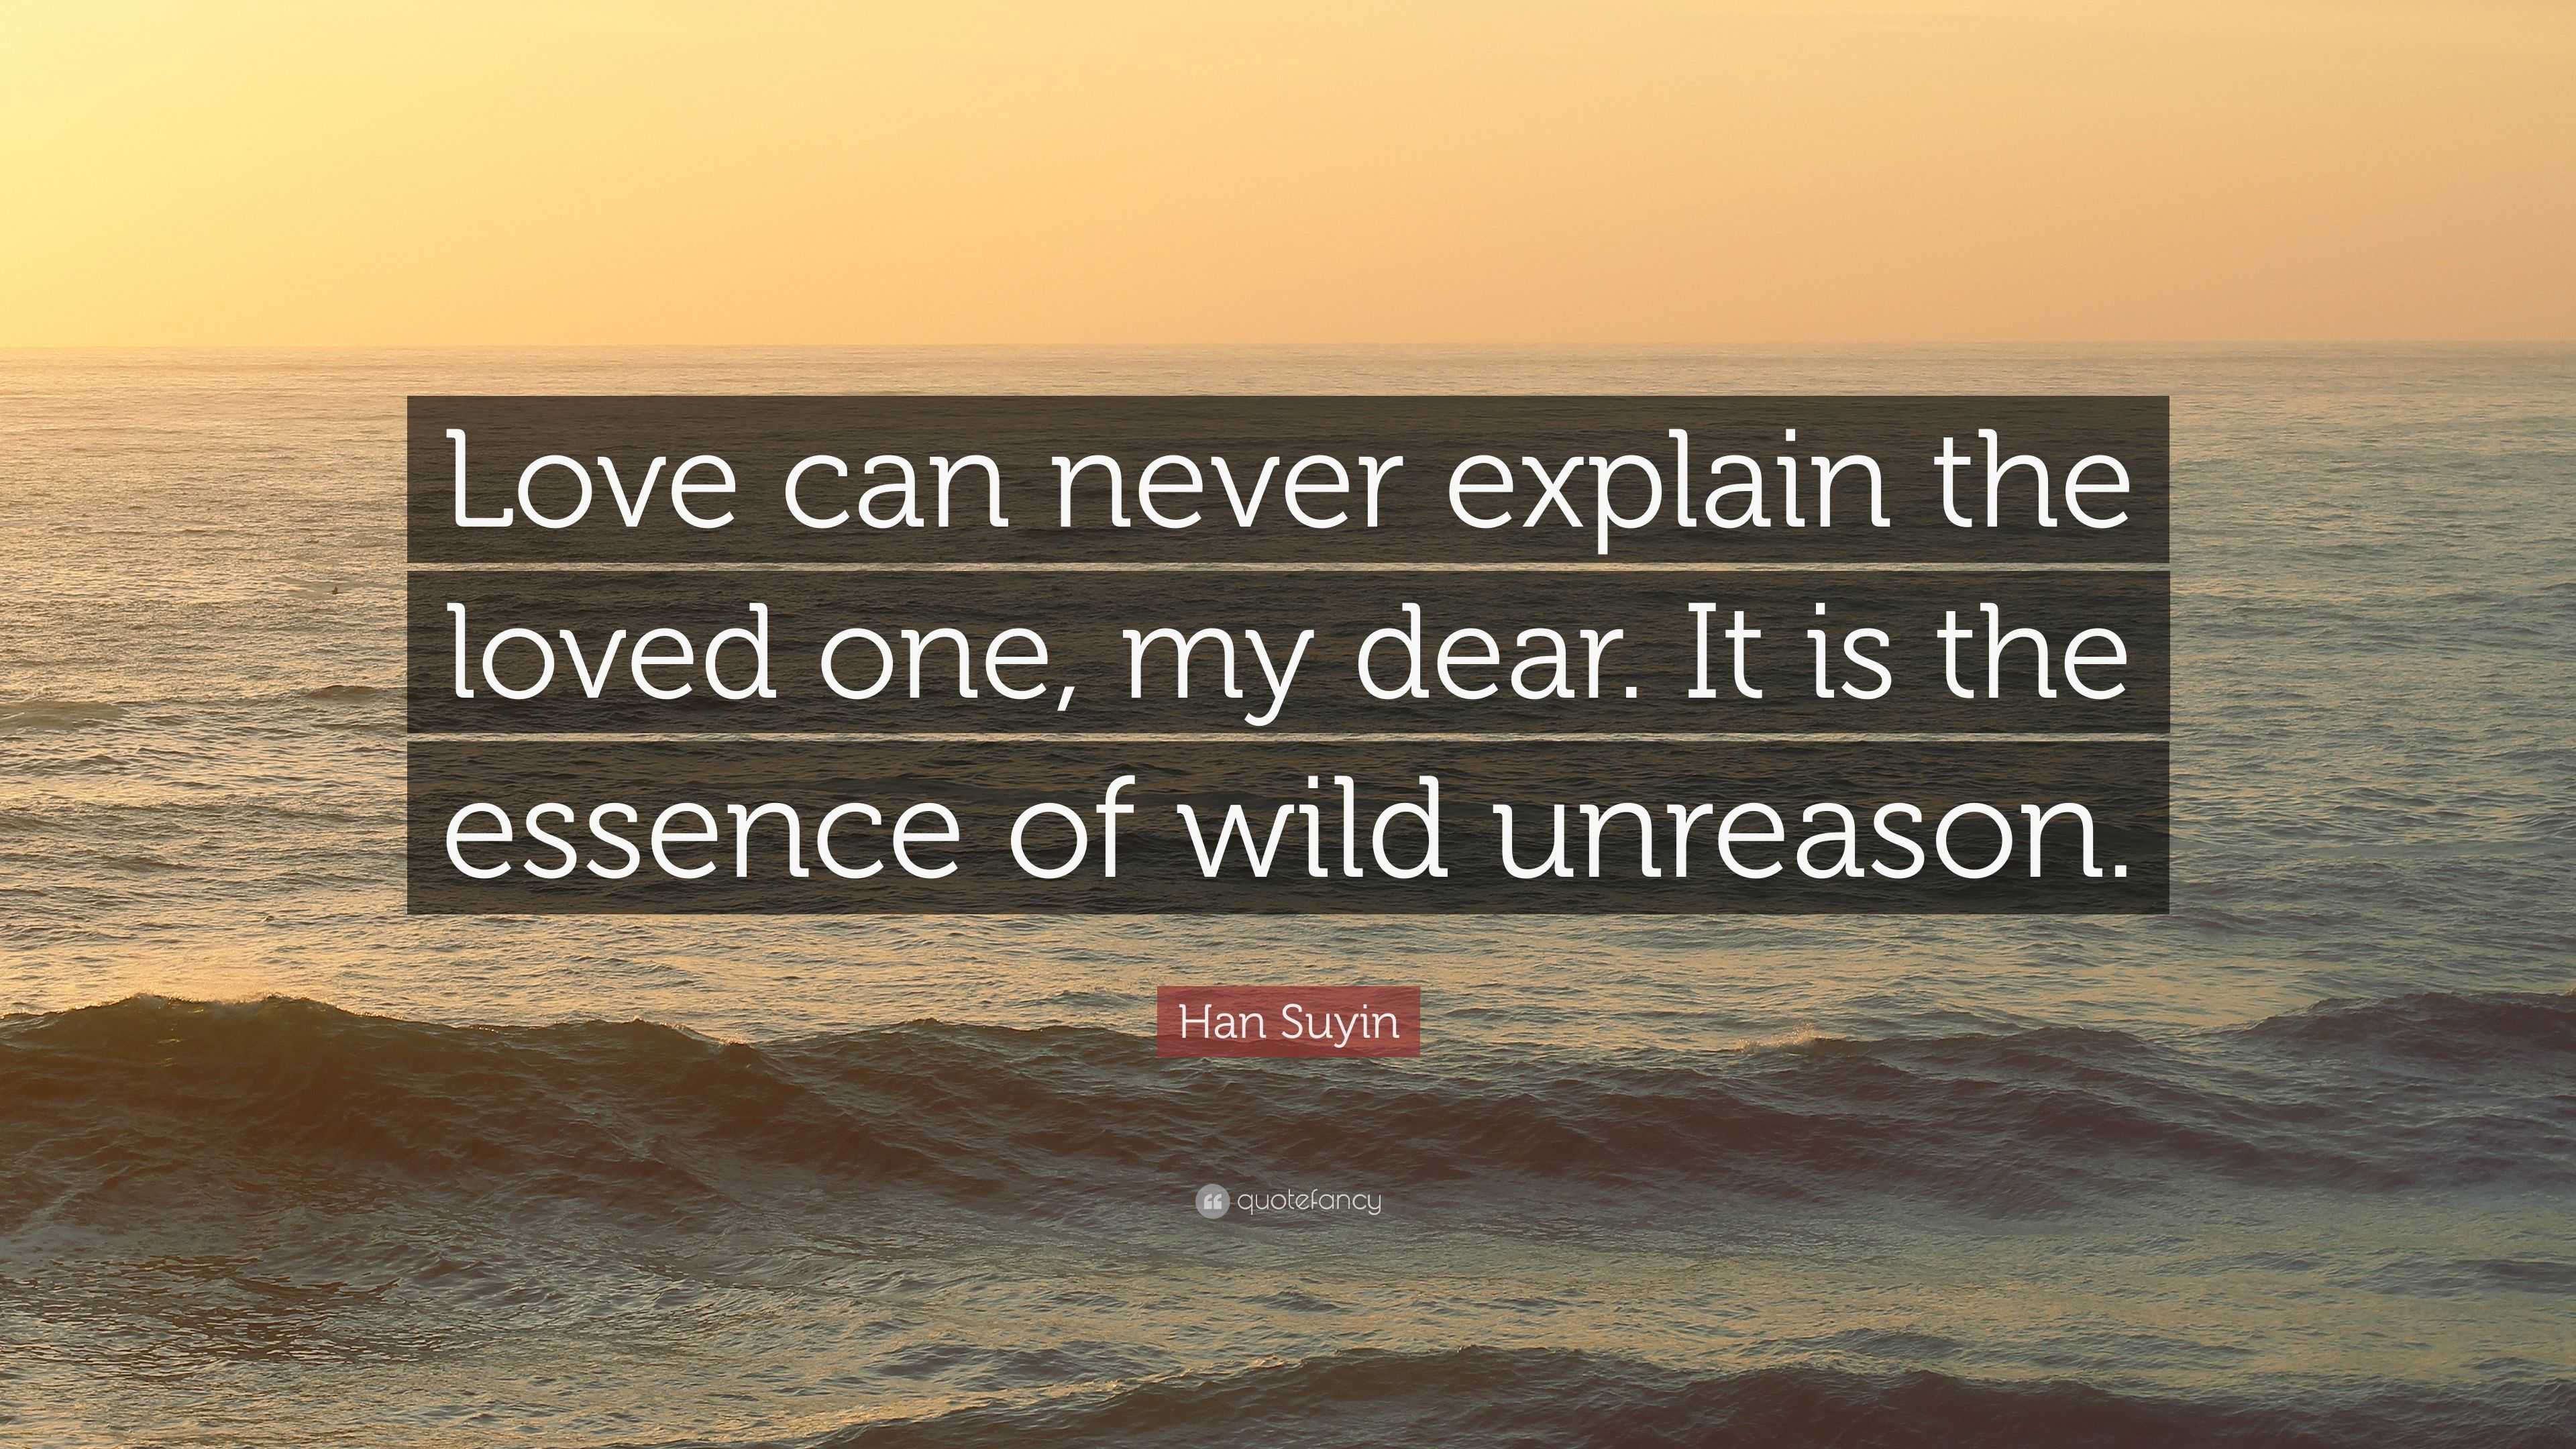 Han Suyin Quote “Love can never explain the loved one my dear